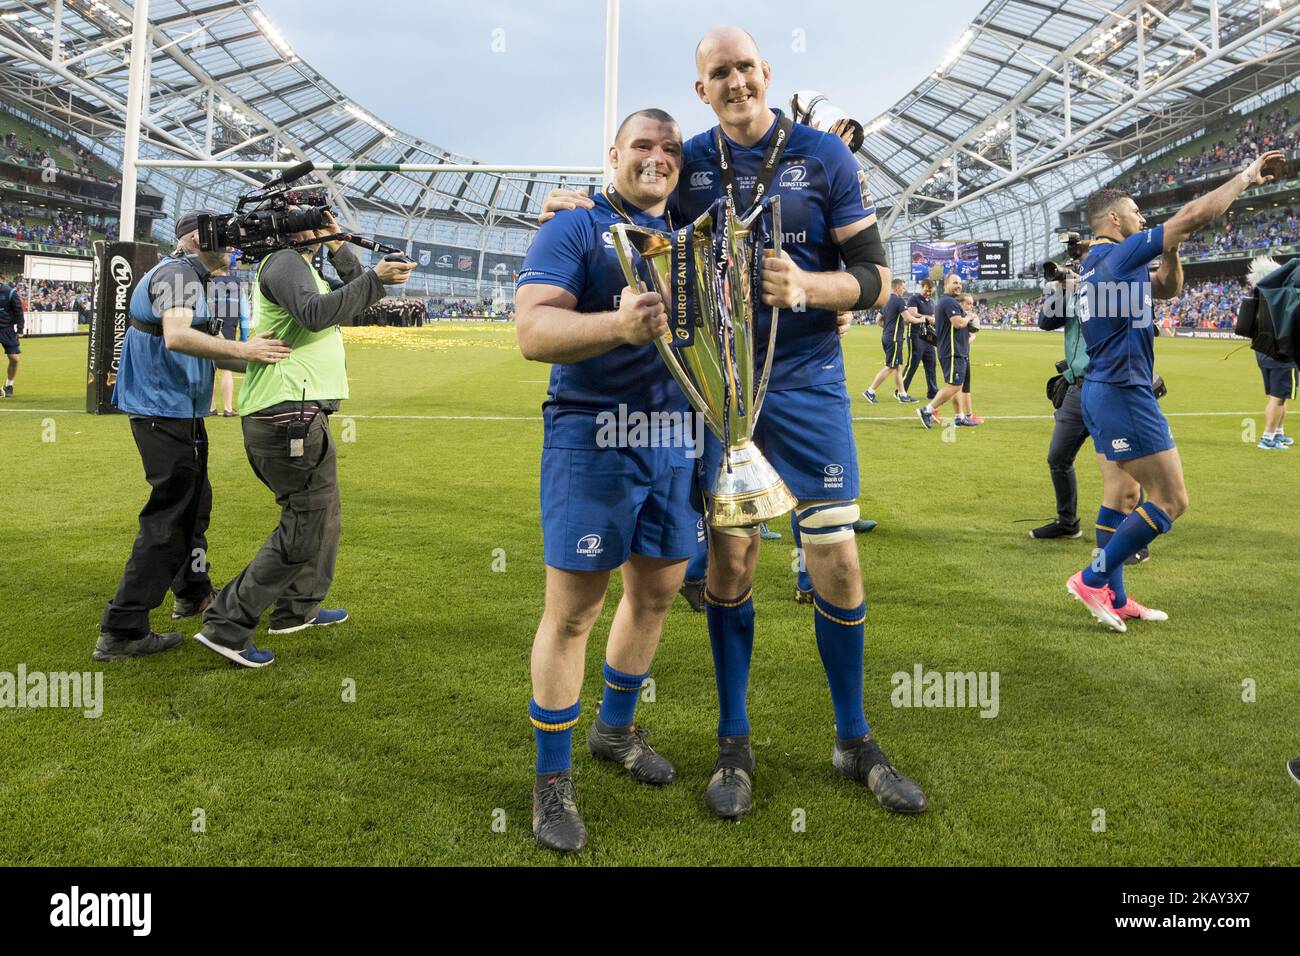 Jack McGrath and Devin Toner of Leinster with the Champions Cup trophy during the Guinness PRO14 Final match between Leinster Rugby and Scarlets at Aviva Stadium in Dublin, Ireland on May 26, 2018 (Photo by Andrew Surma/NurPhoto) Stock Photo